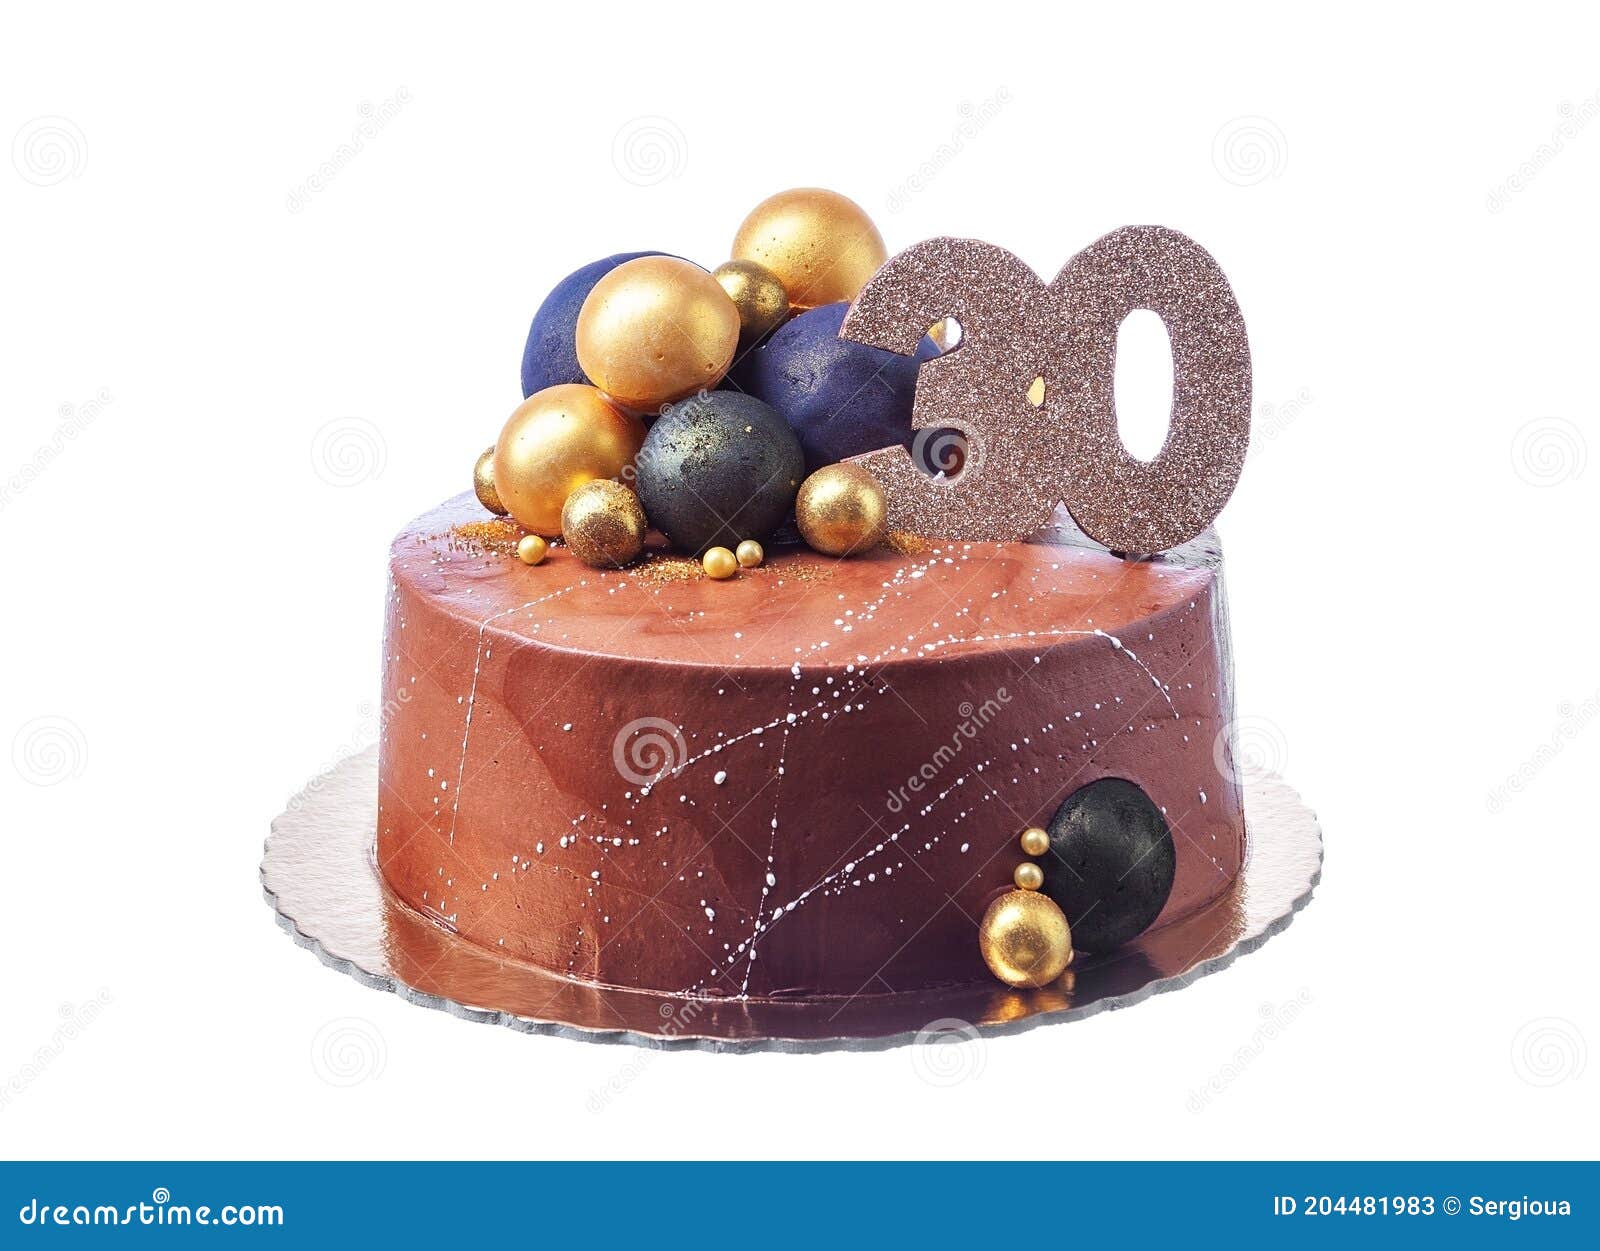 An Original Conceptual Chocolate Cake with Round Ball Decorations ...